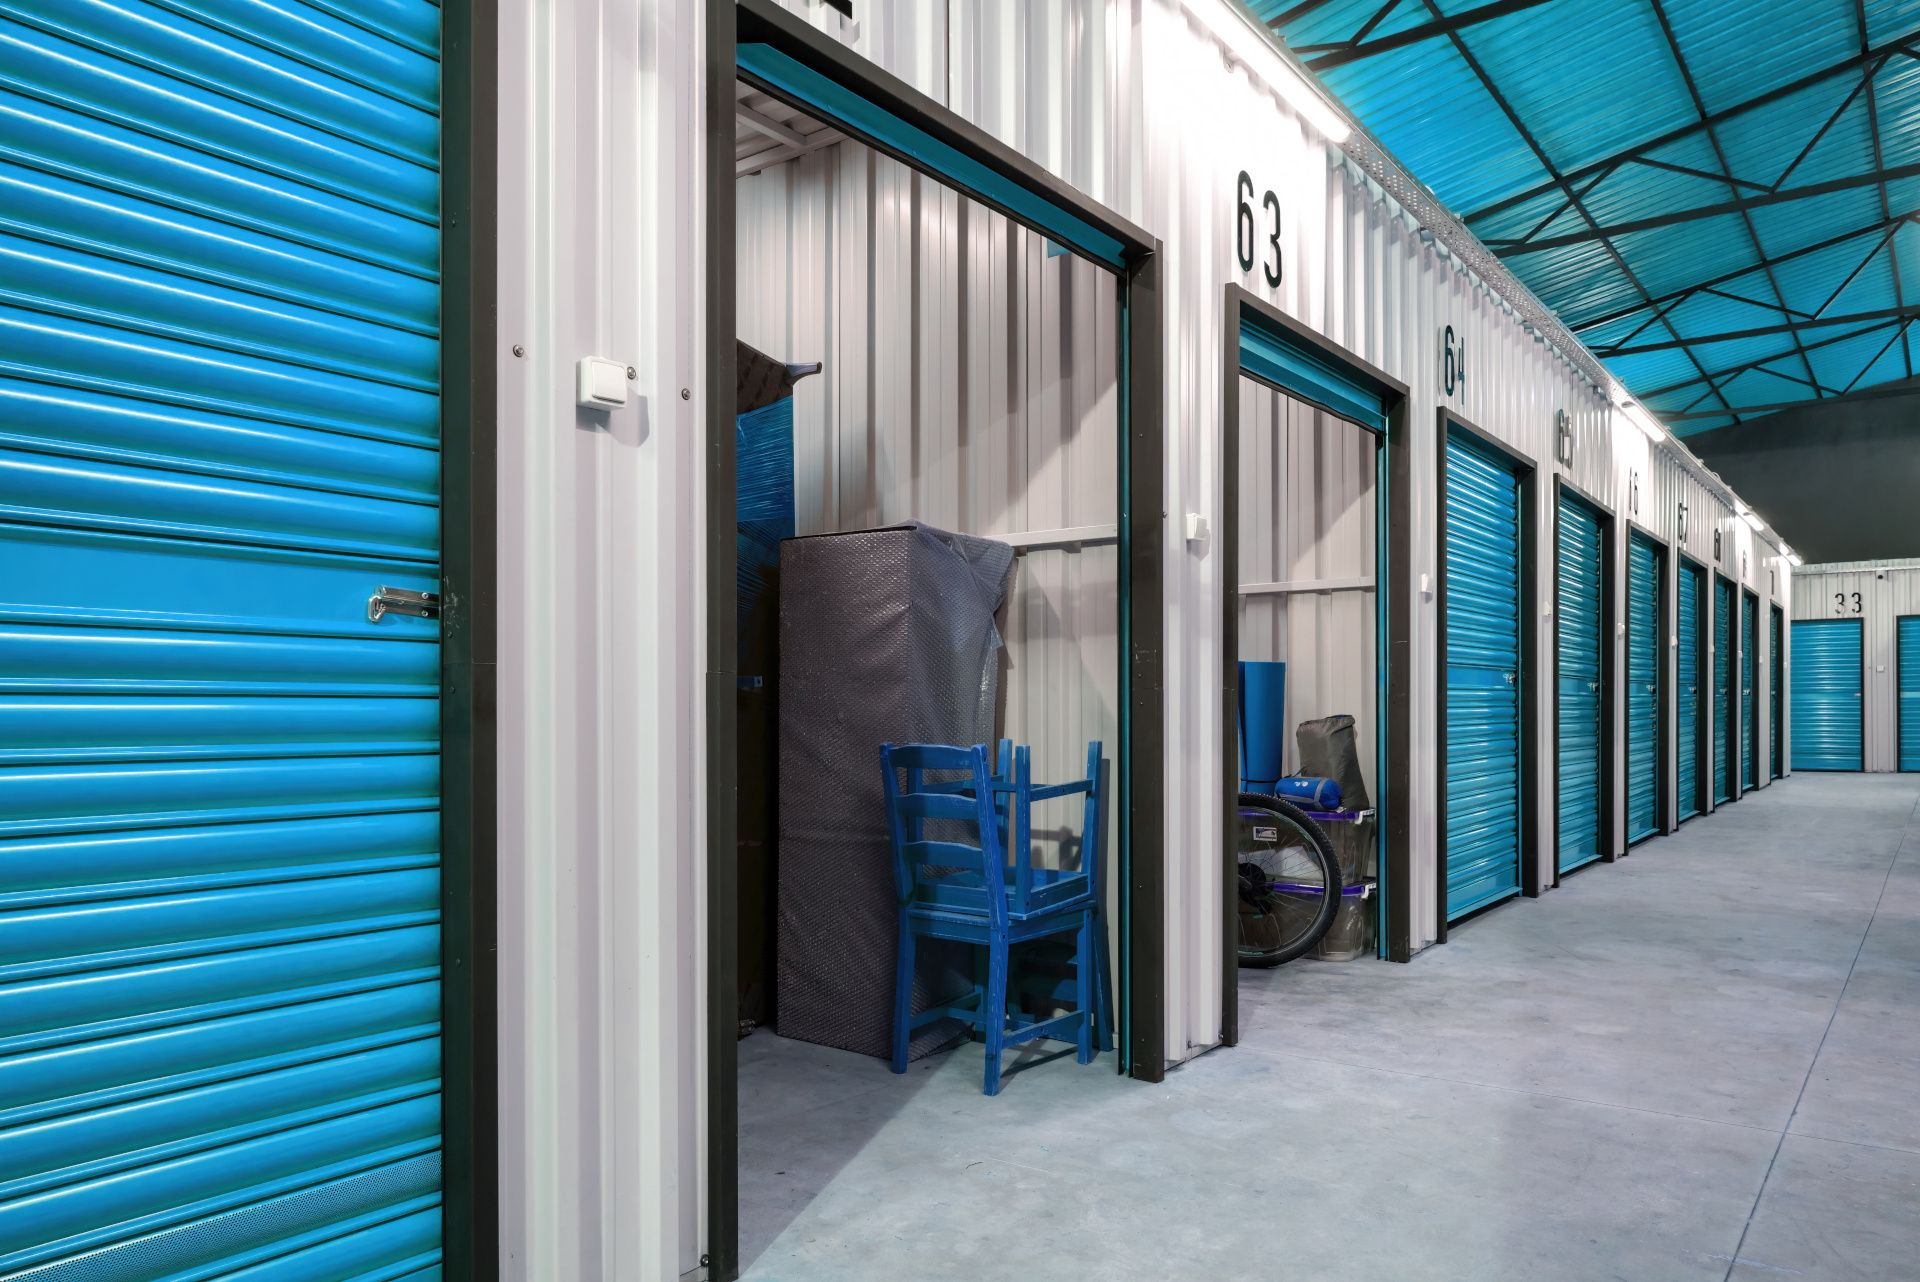 Self storage units filled with items